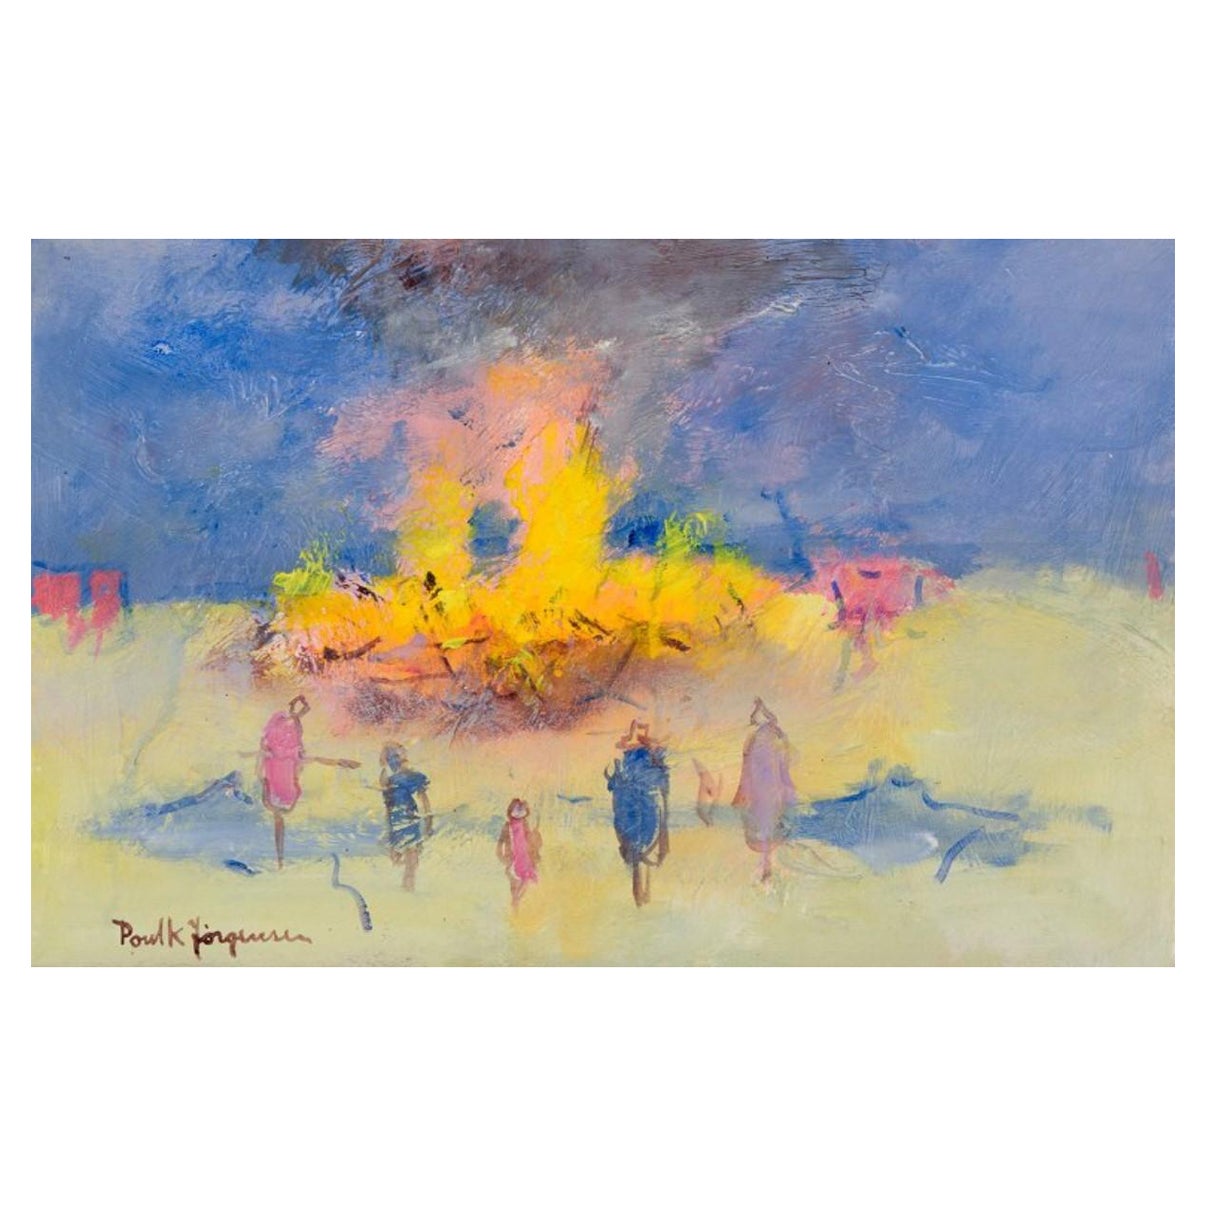 Poul K. Jörgensen.  Oil on board. Valborg´s Eve with people by the bonfire